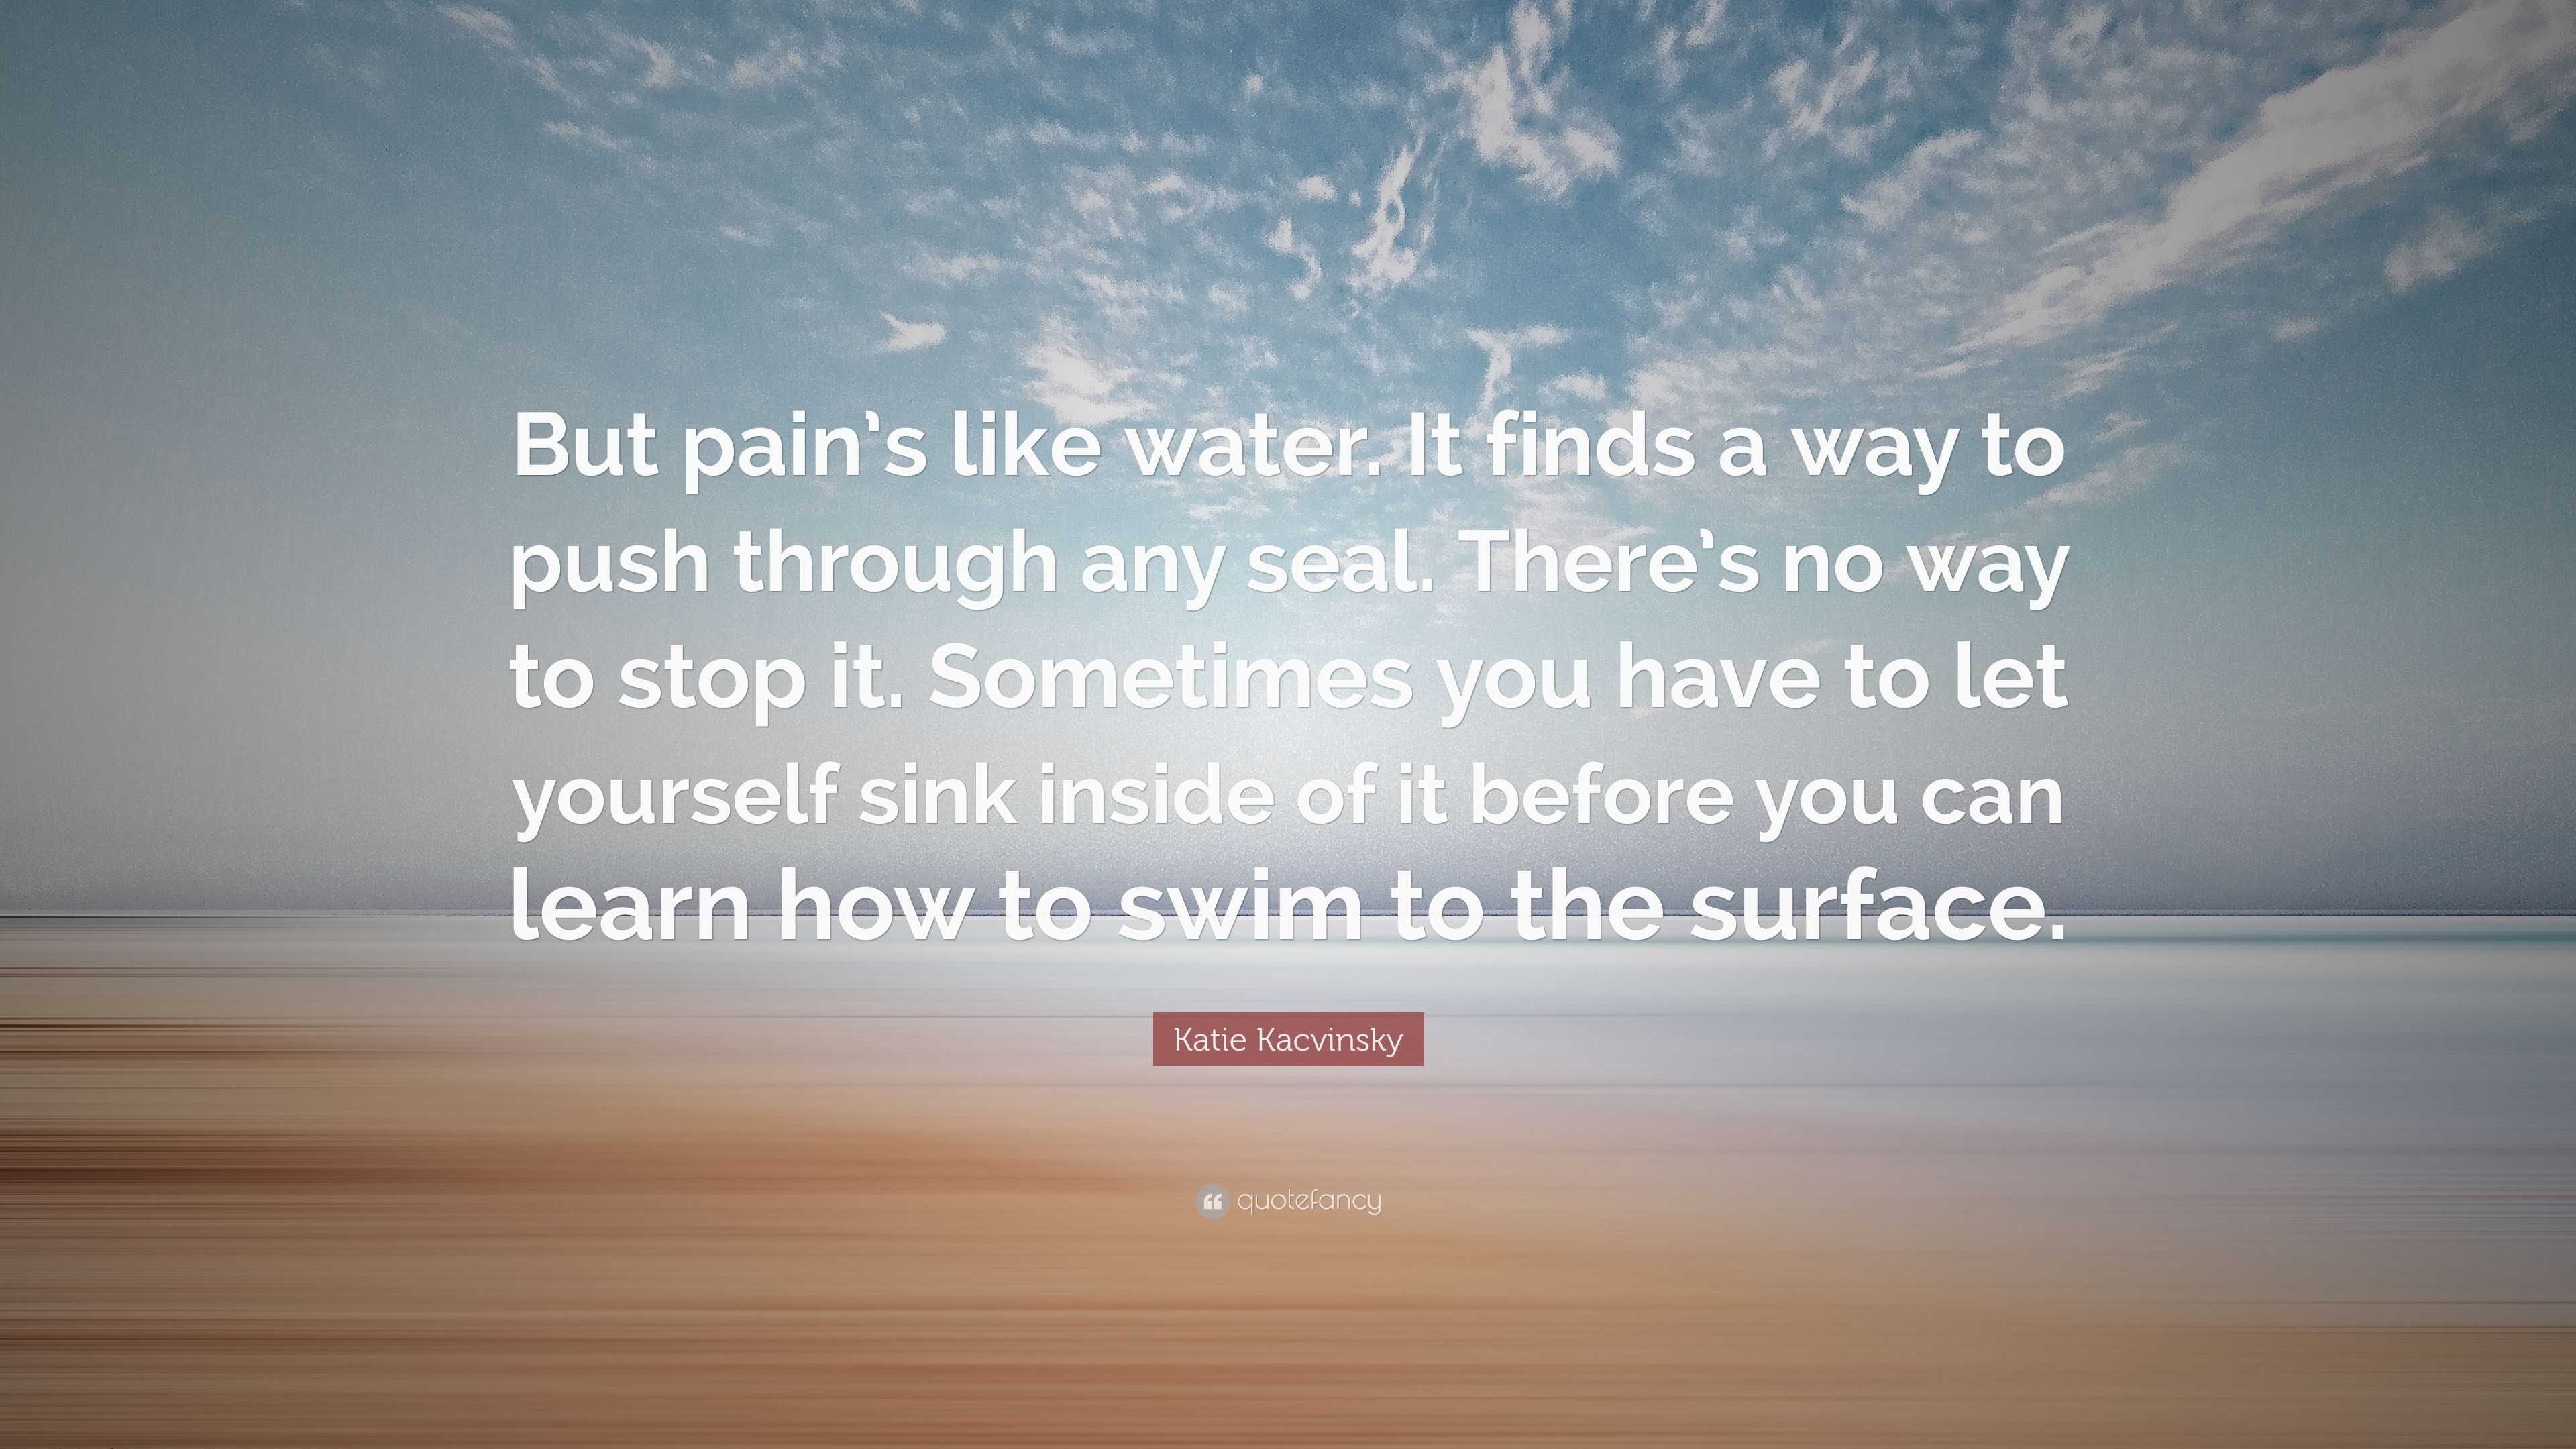 Katie Kacvinsky Quote: “But pain's like water. It finds a way to